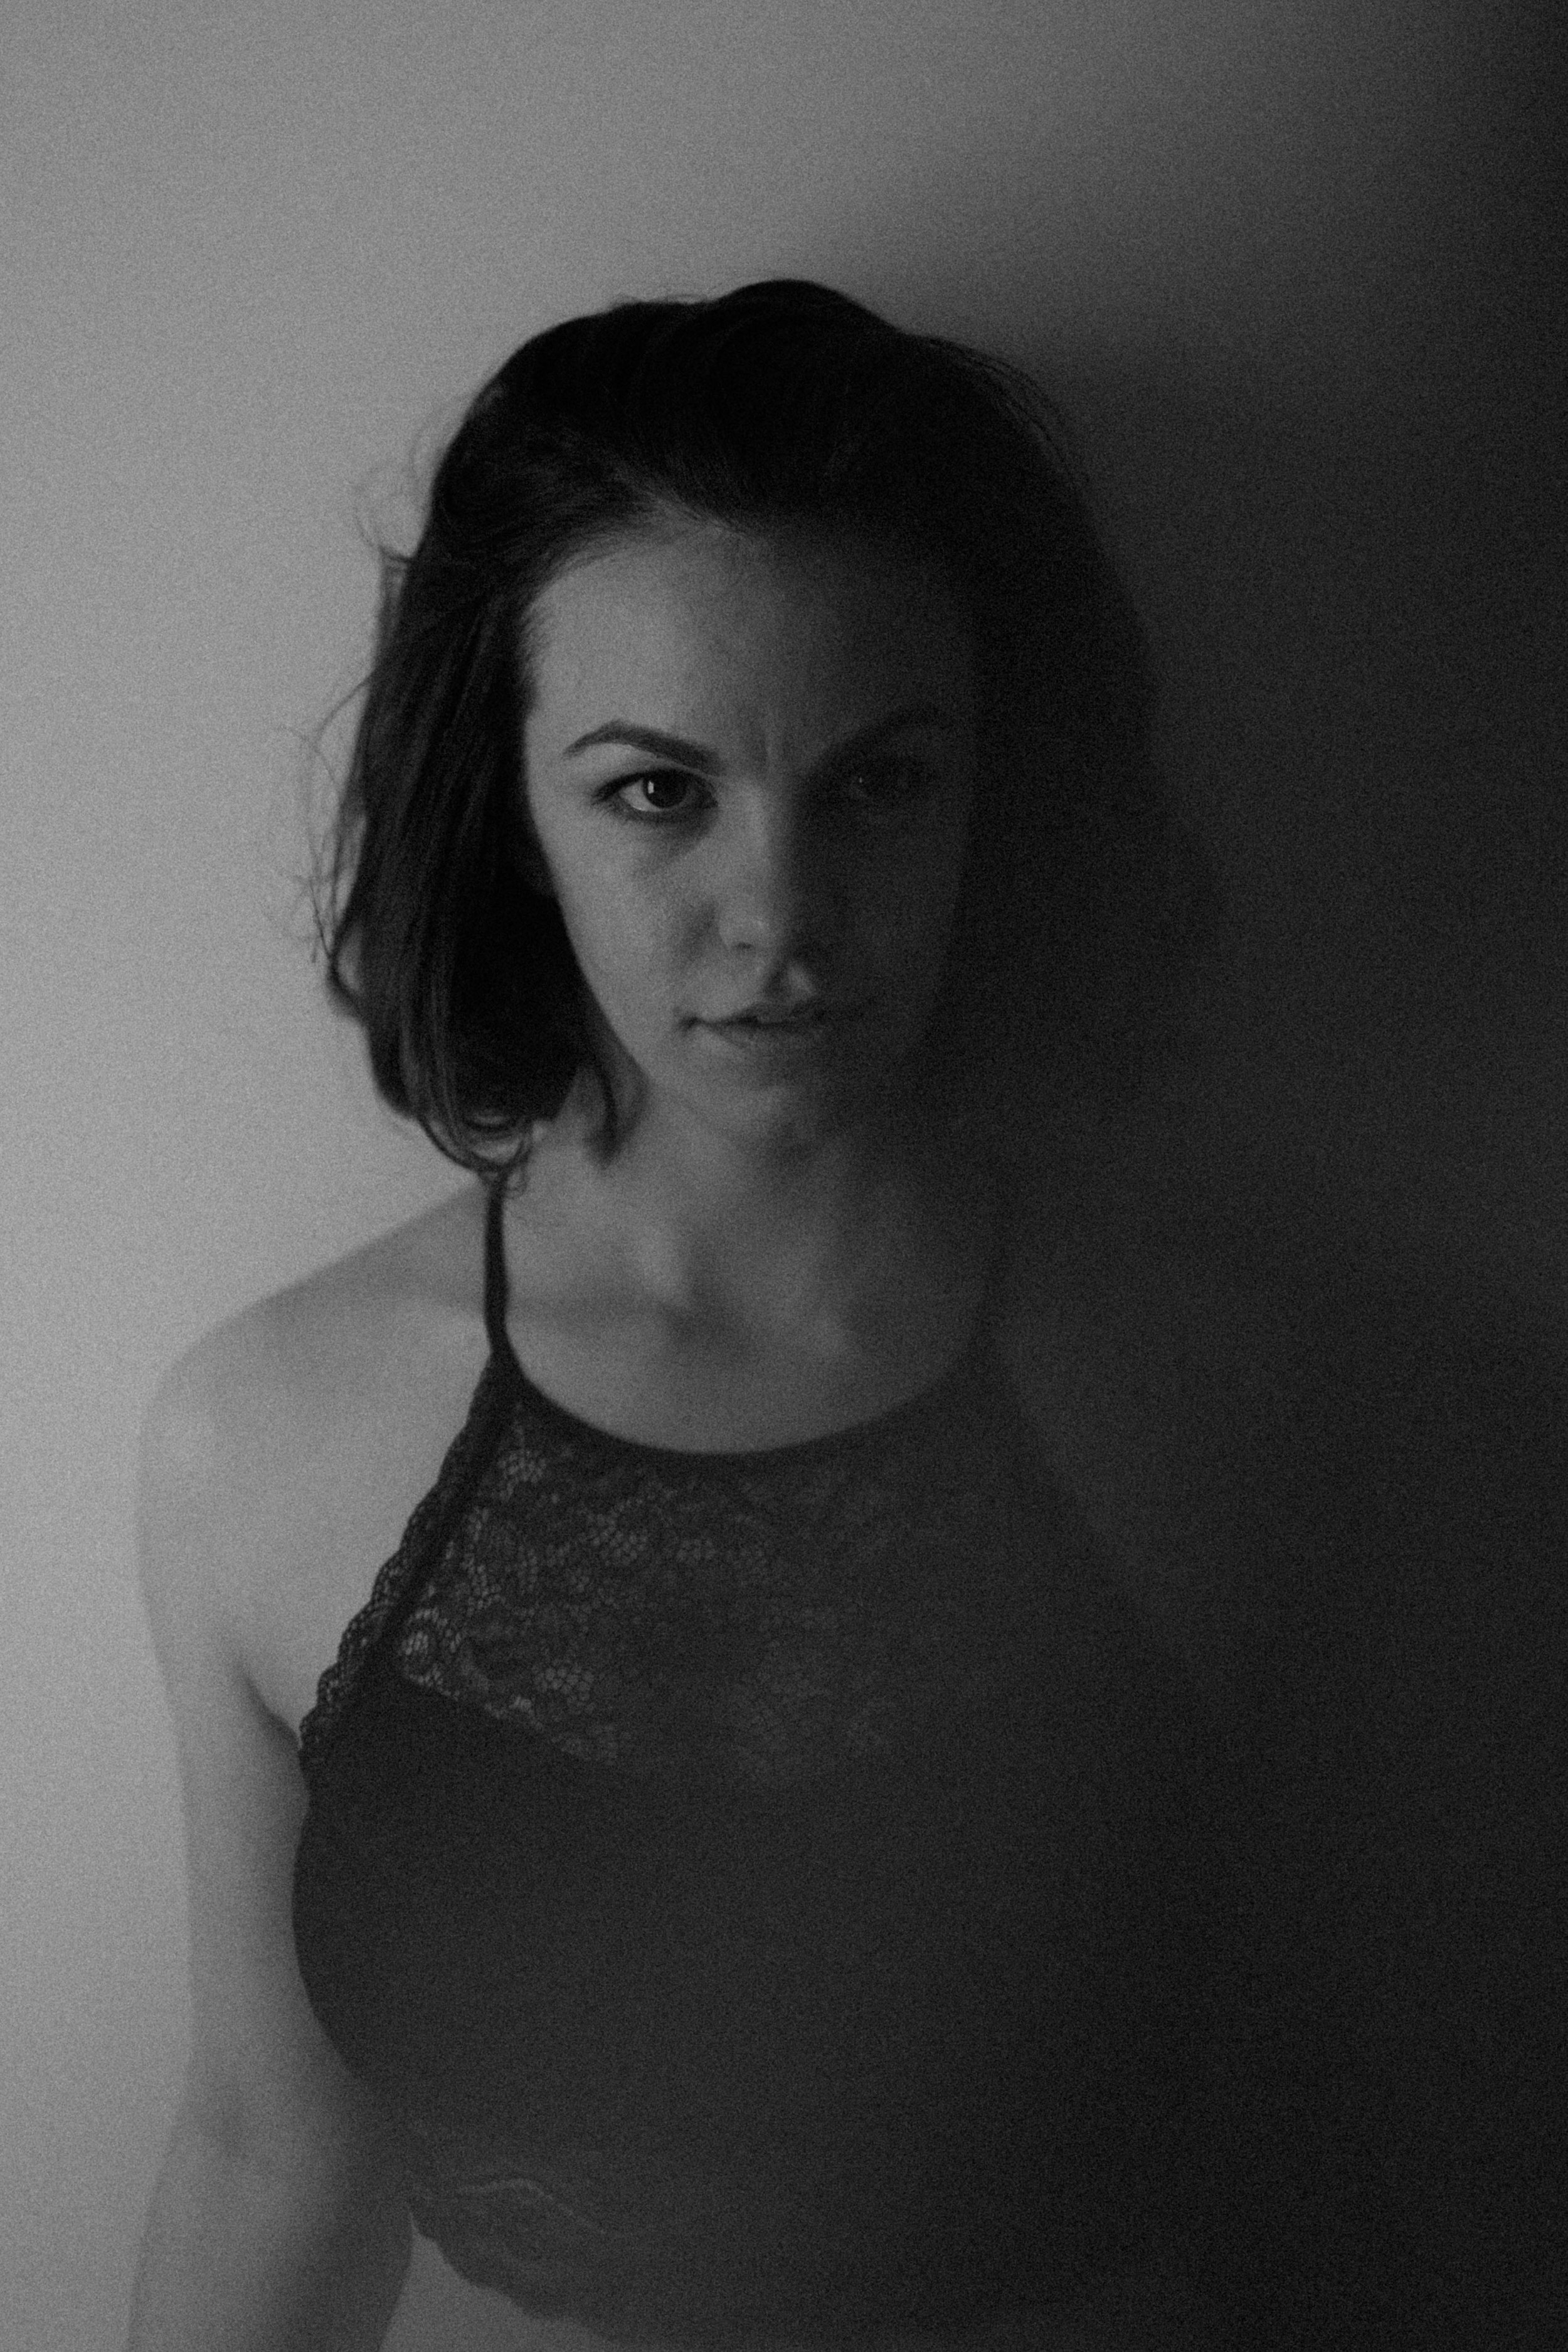  a black-and-white portrait of emma grimsley in a victorian airbnb in dayton, ohio. a piece of fabric is floating through the air, covering part of her torso. emma is clothed in a black lace crop top bralette. photograph by sarah rose walk of sarah r